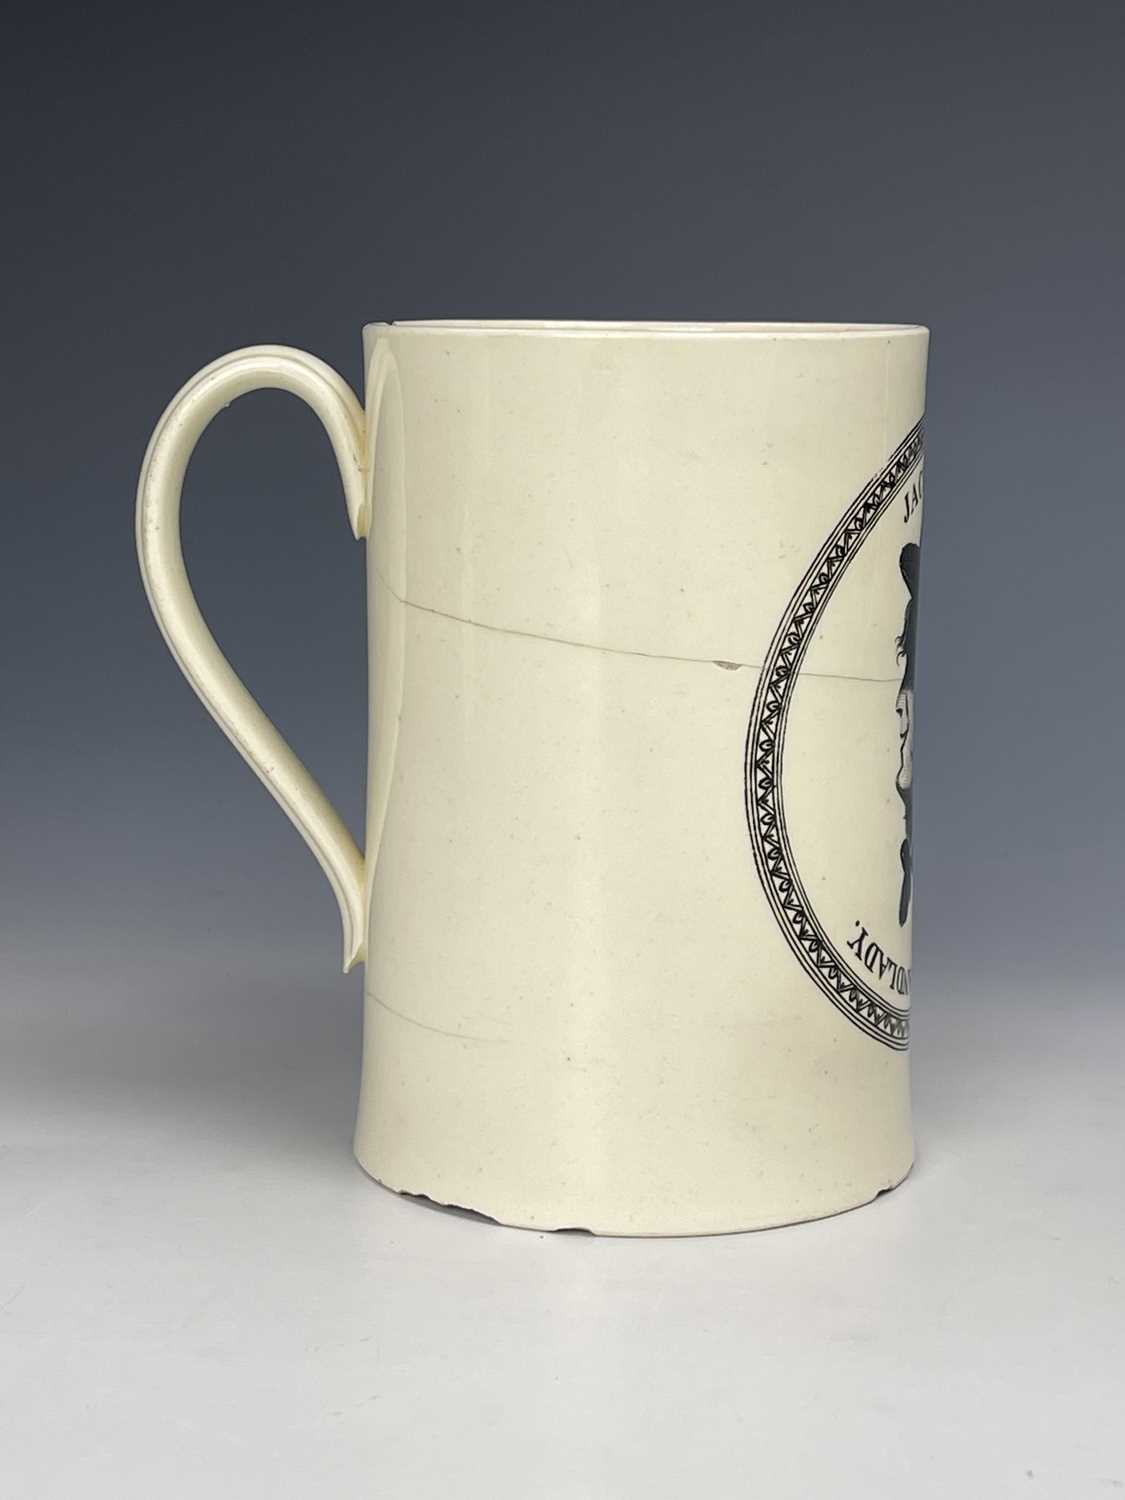 A creamware mug, circa 1780, transfer printed with a satirical inverted 'Jack Tar and Wapping - Image 2 of 4